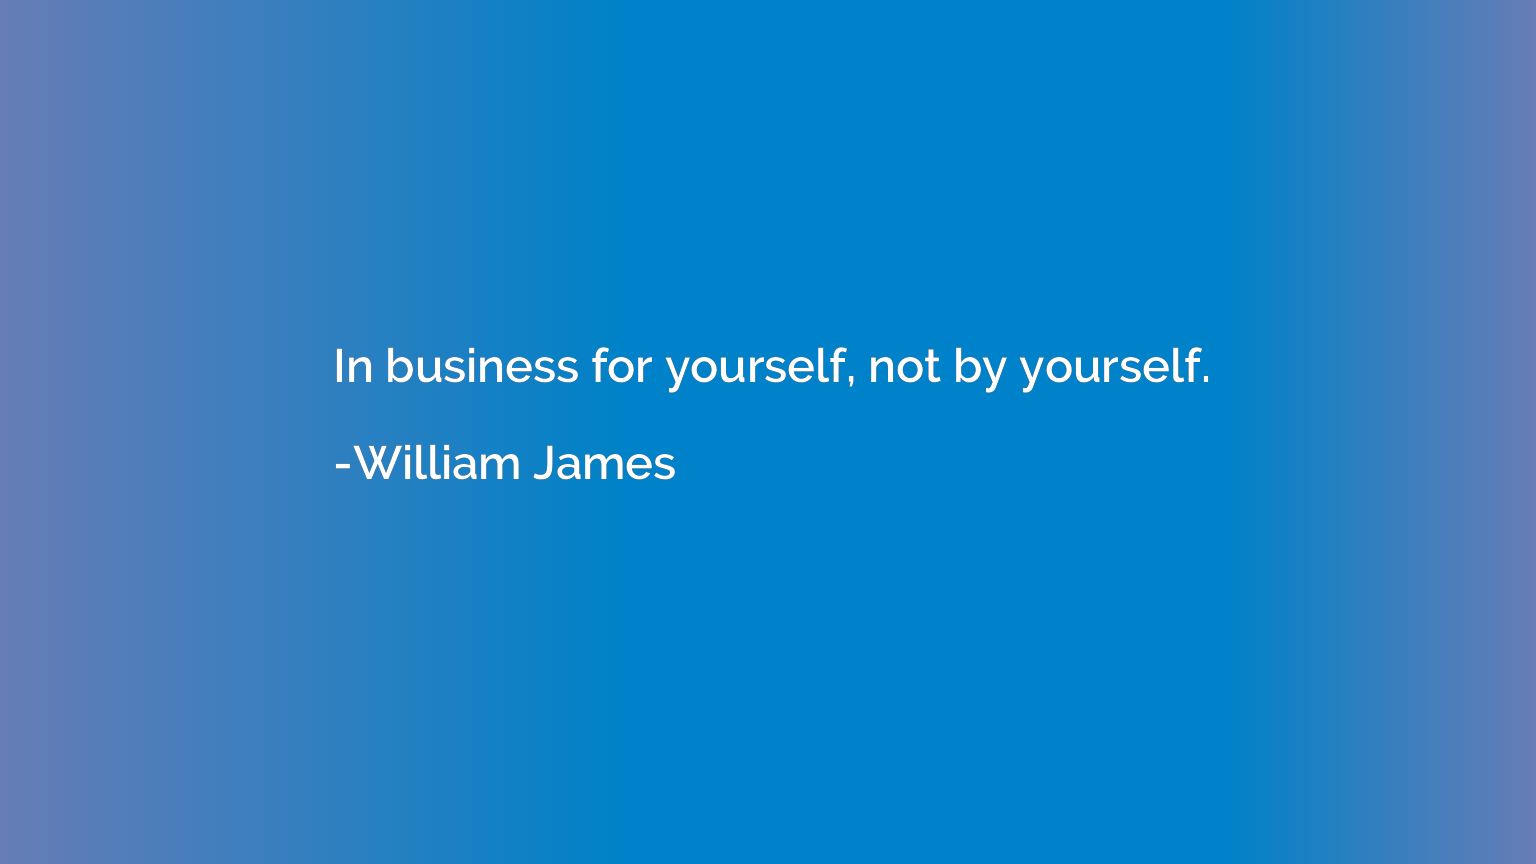 In business for yourself, not by yourself.